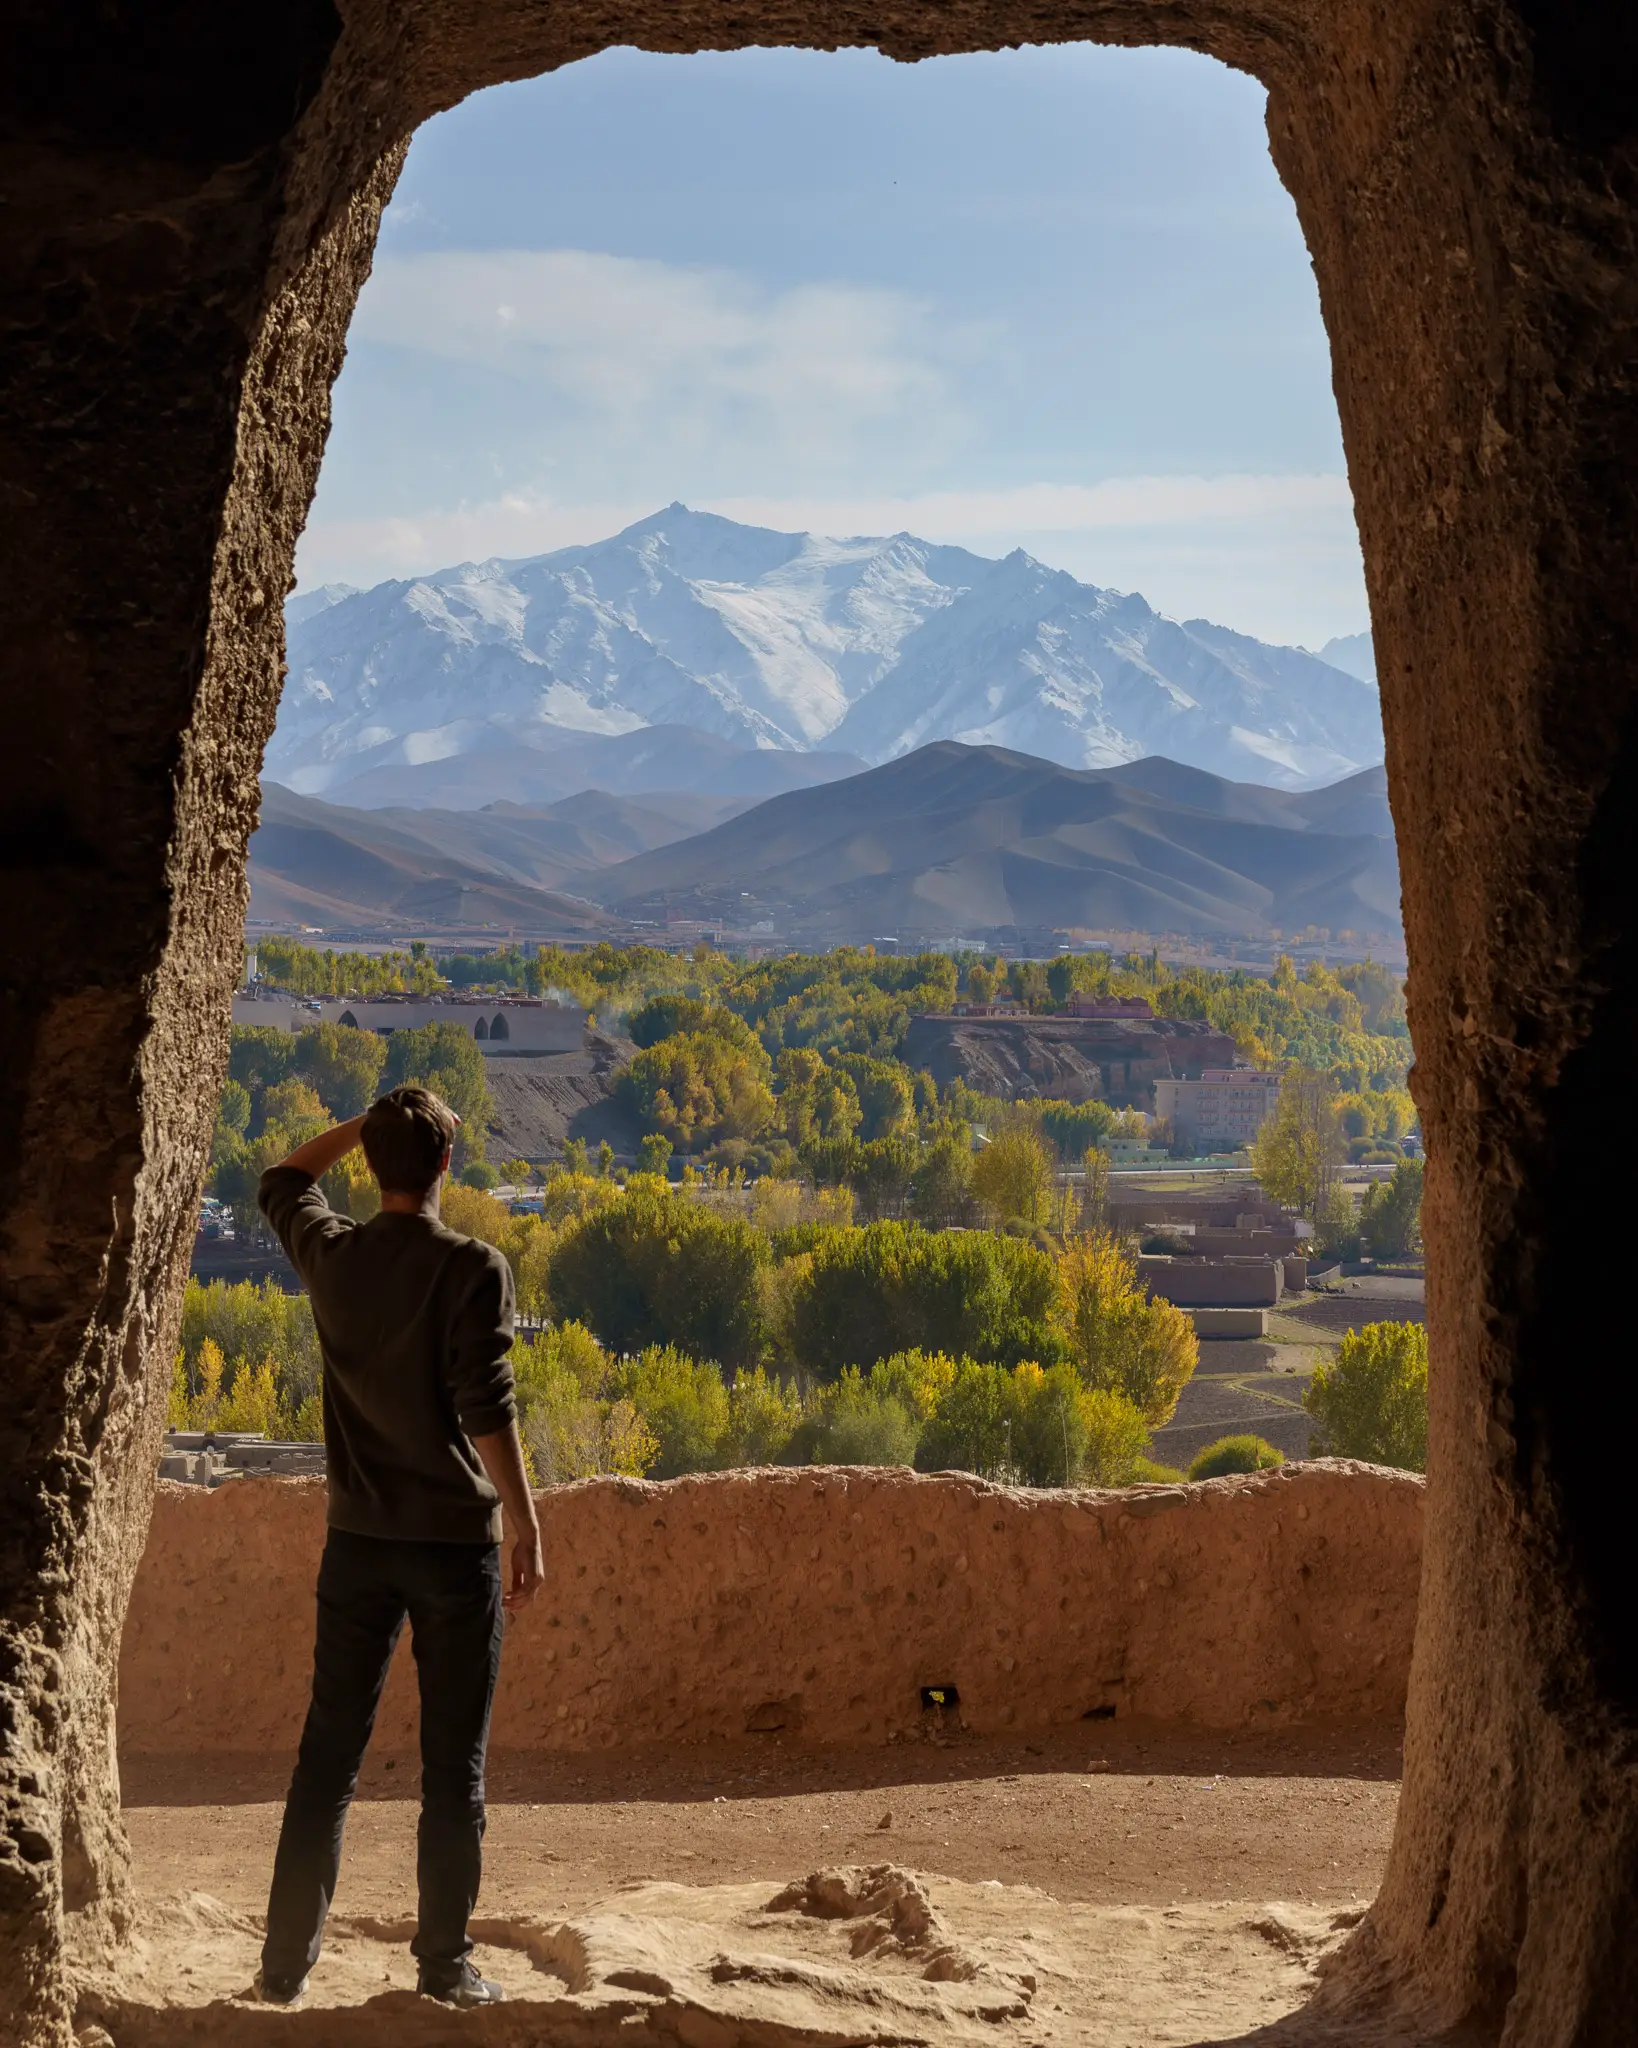 View from inside of the Bamiyan Buddhas